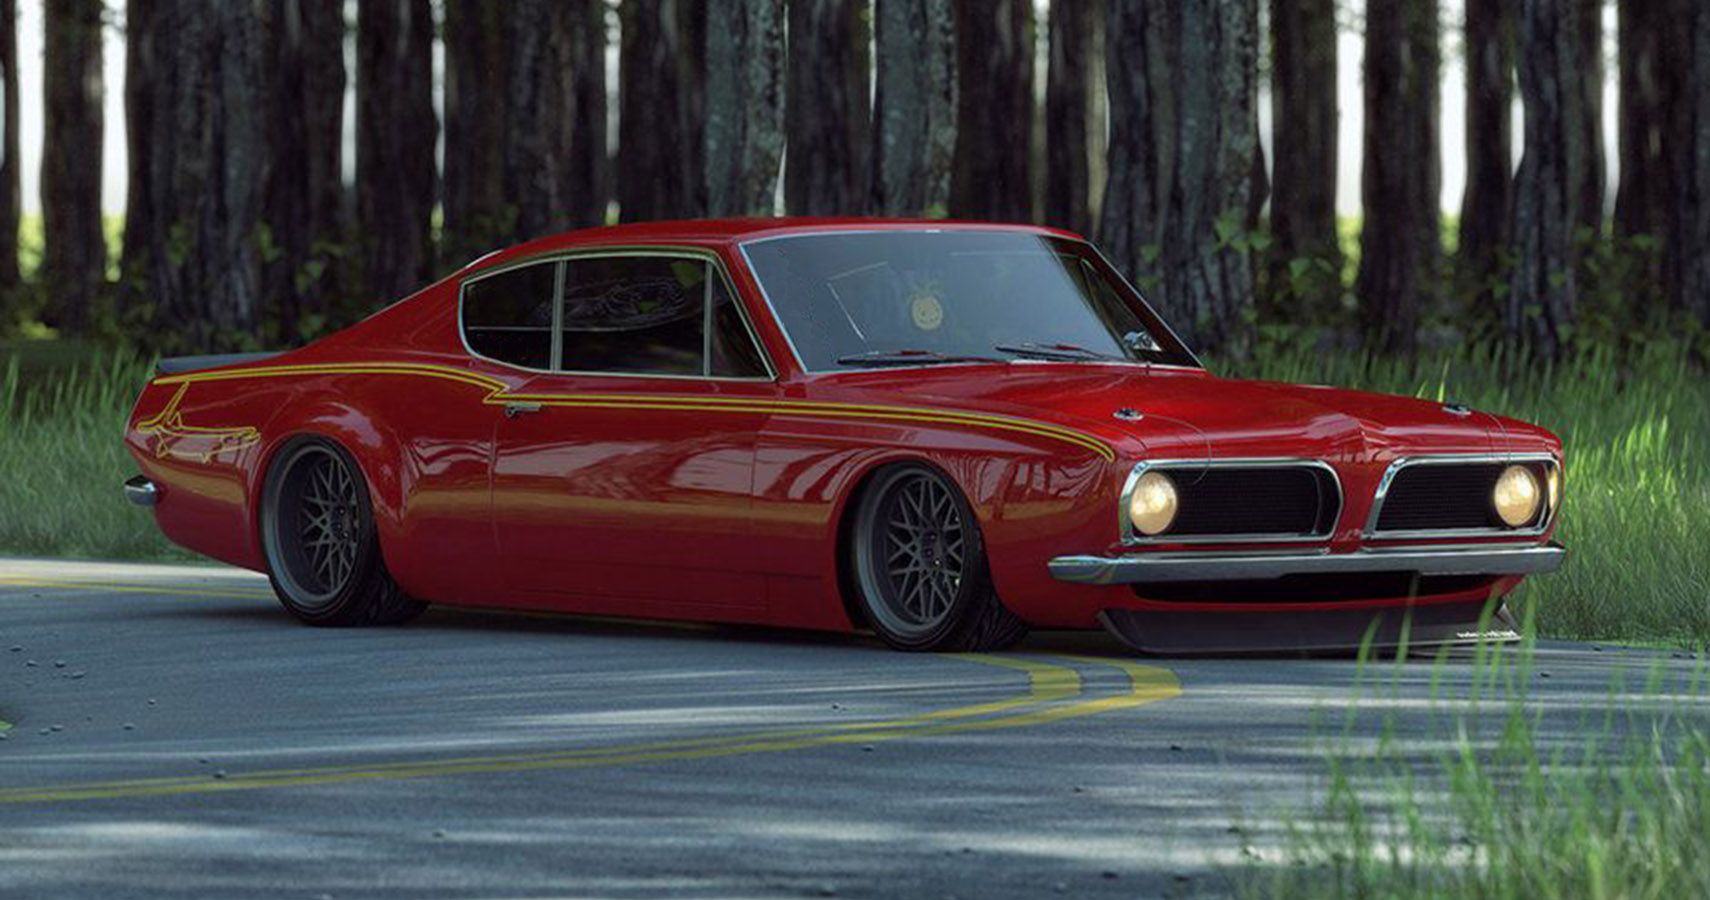 A Beautiful Plymouth Barracuda In Red